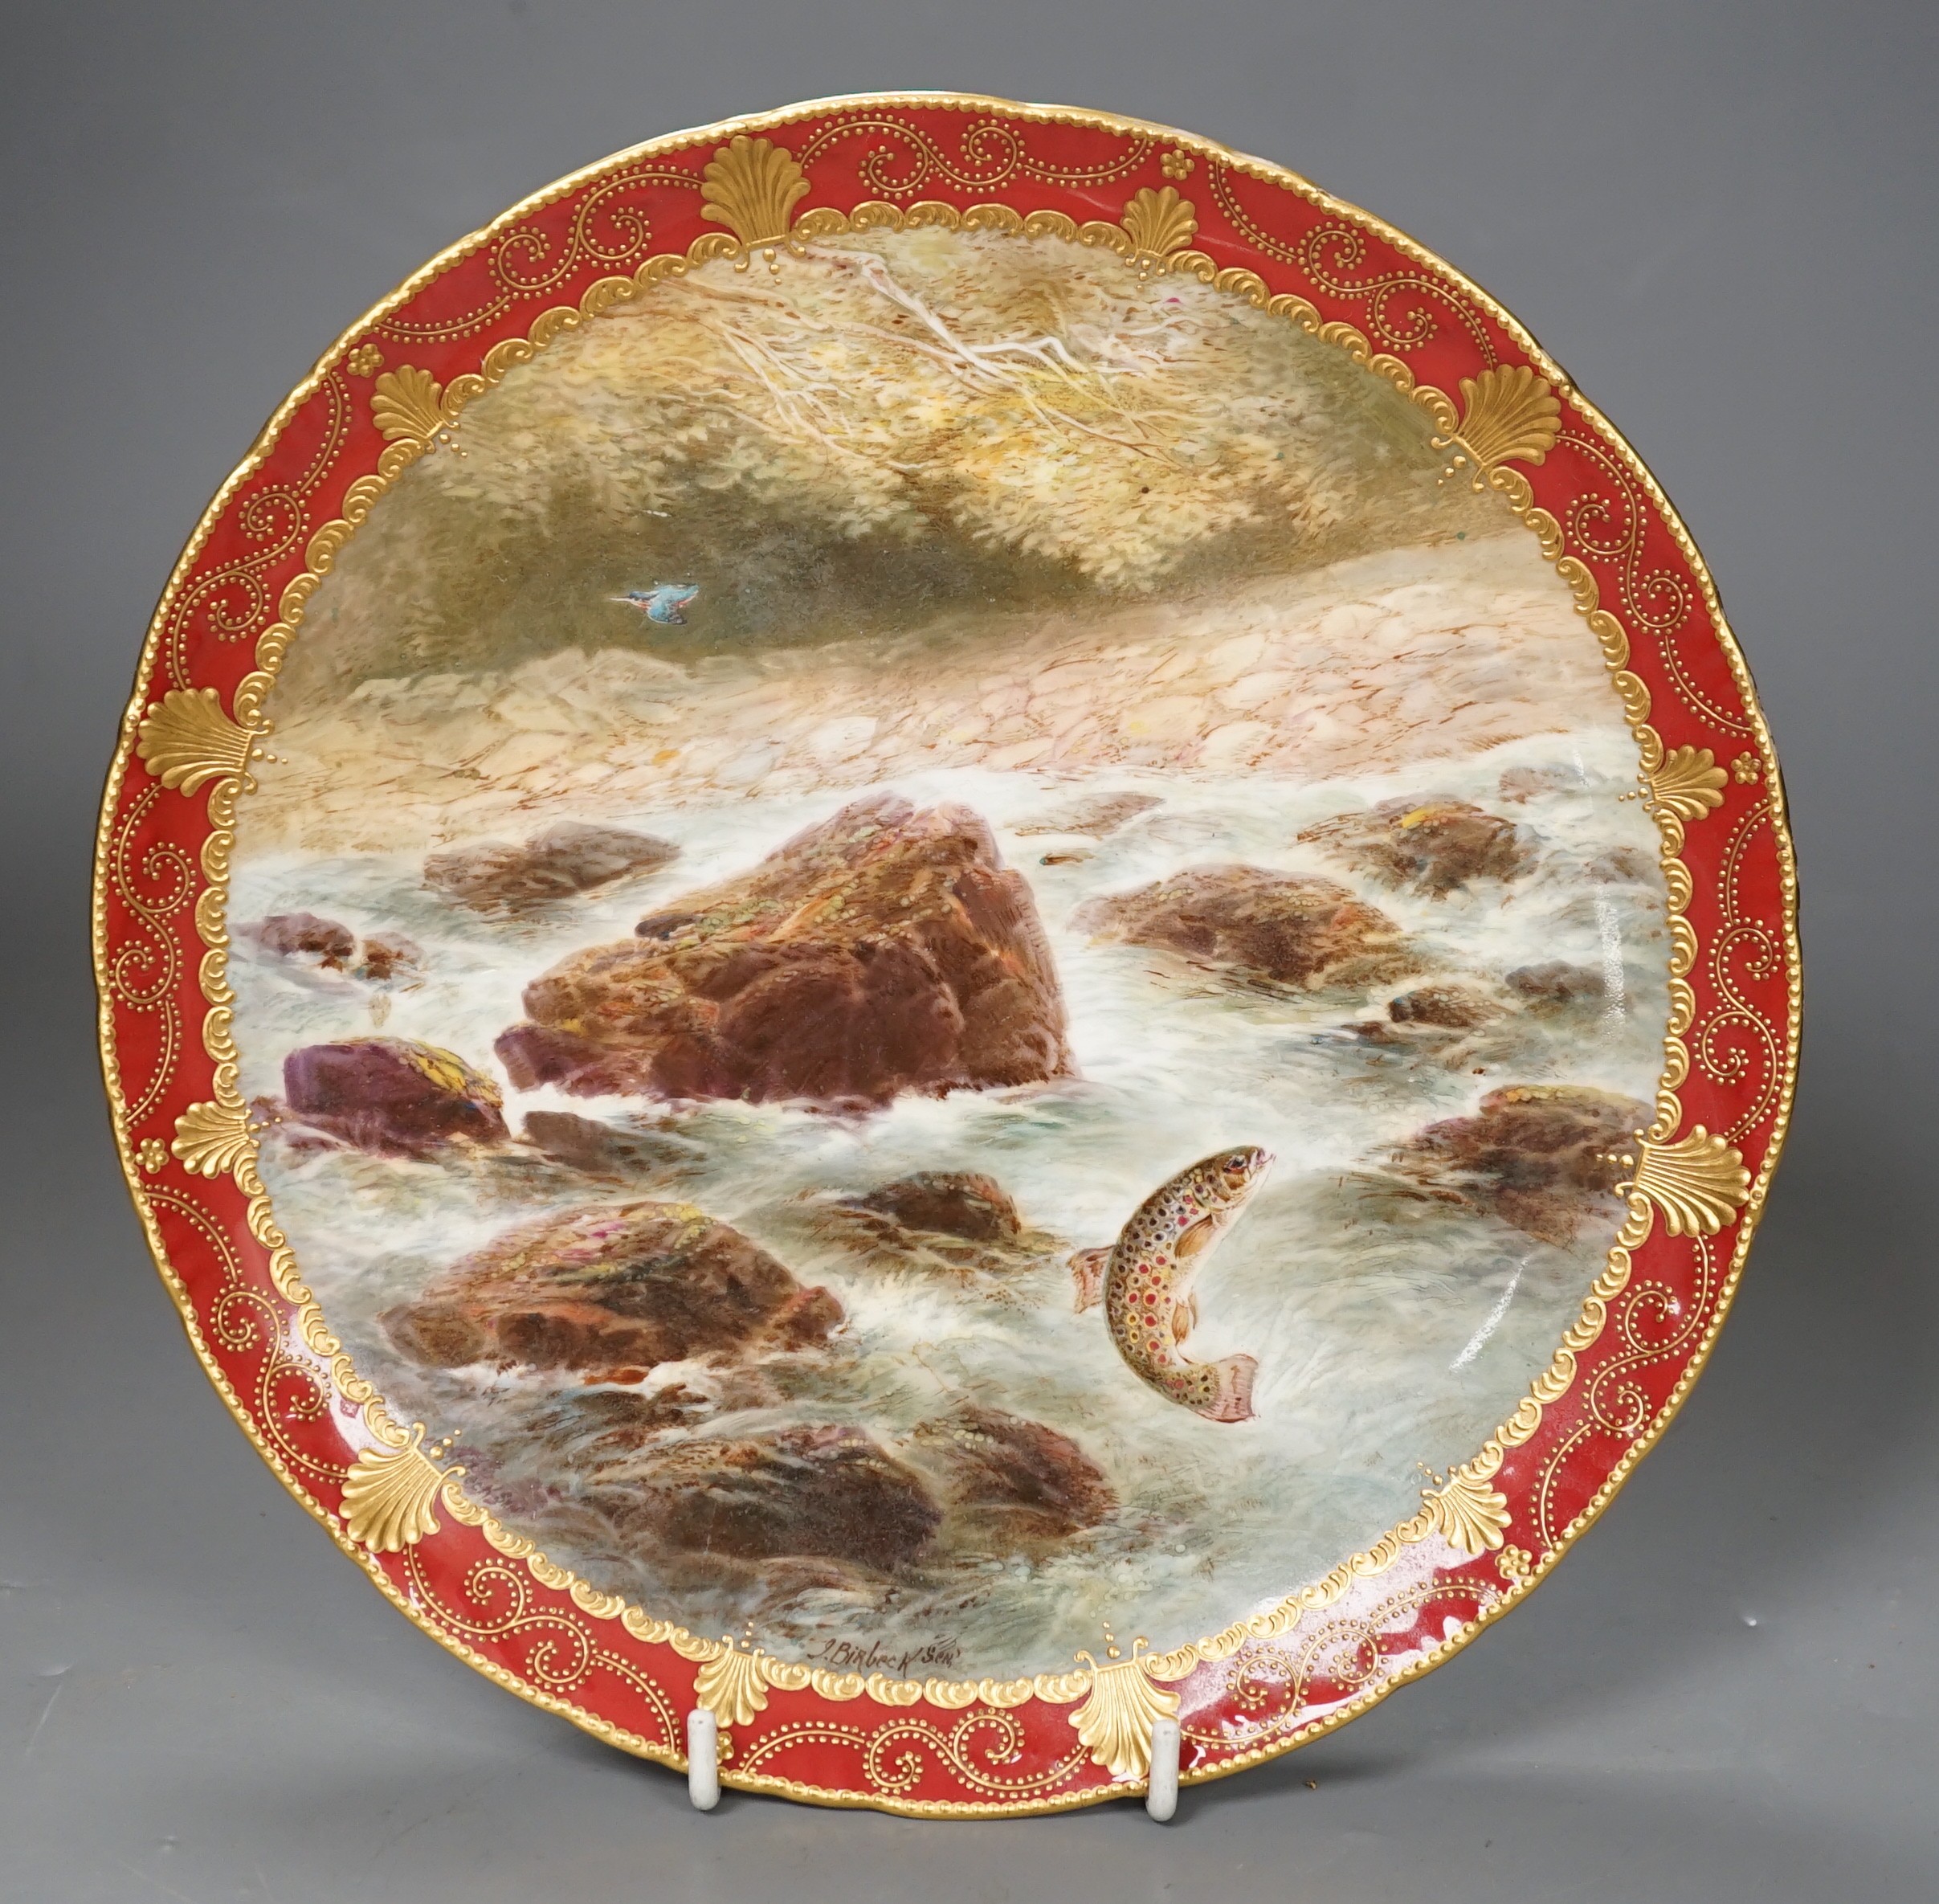 Joseph Birbeck Senior for Cauldon, a cabinet plate painted with a leaping salmon, signed, 22cm diameter